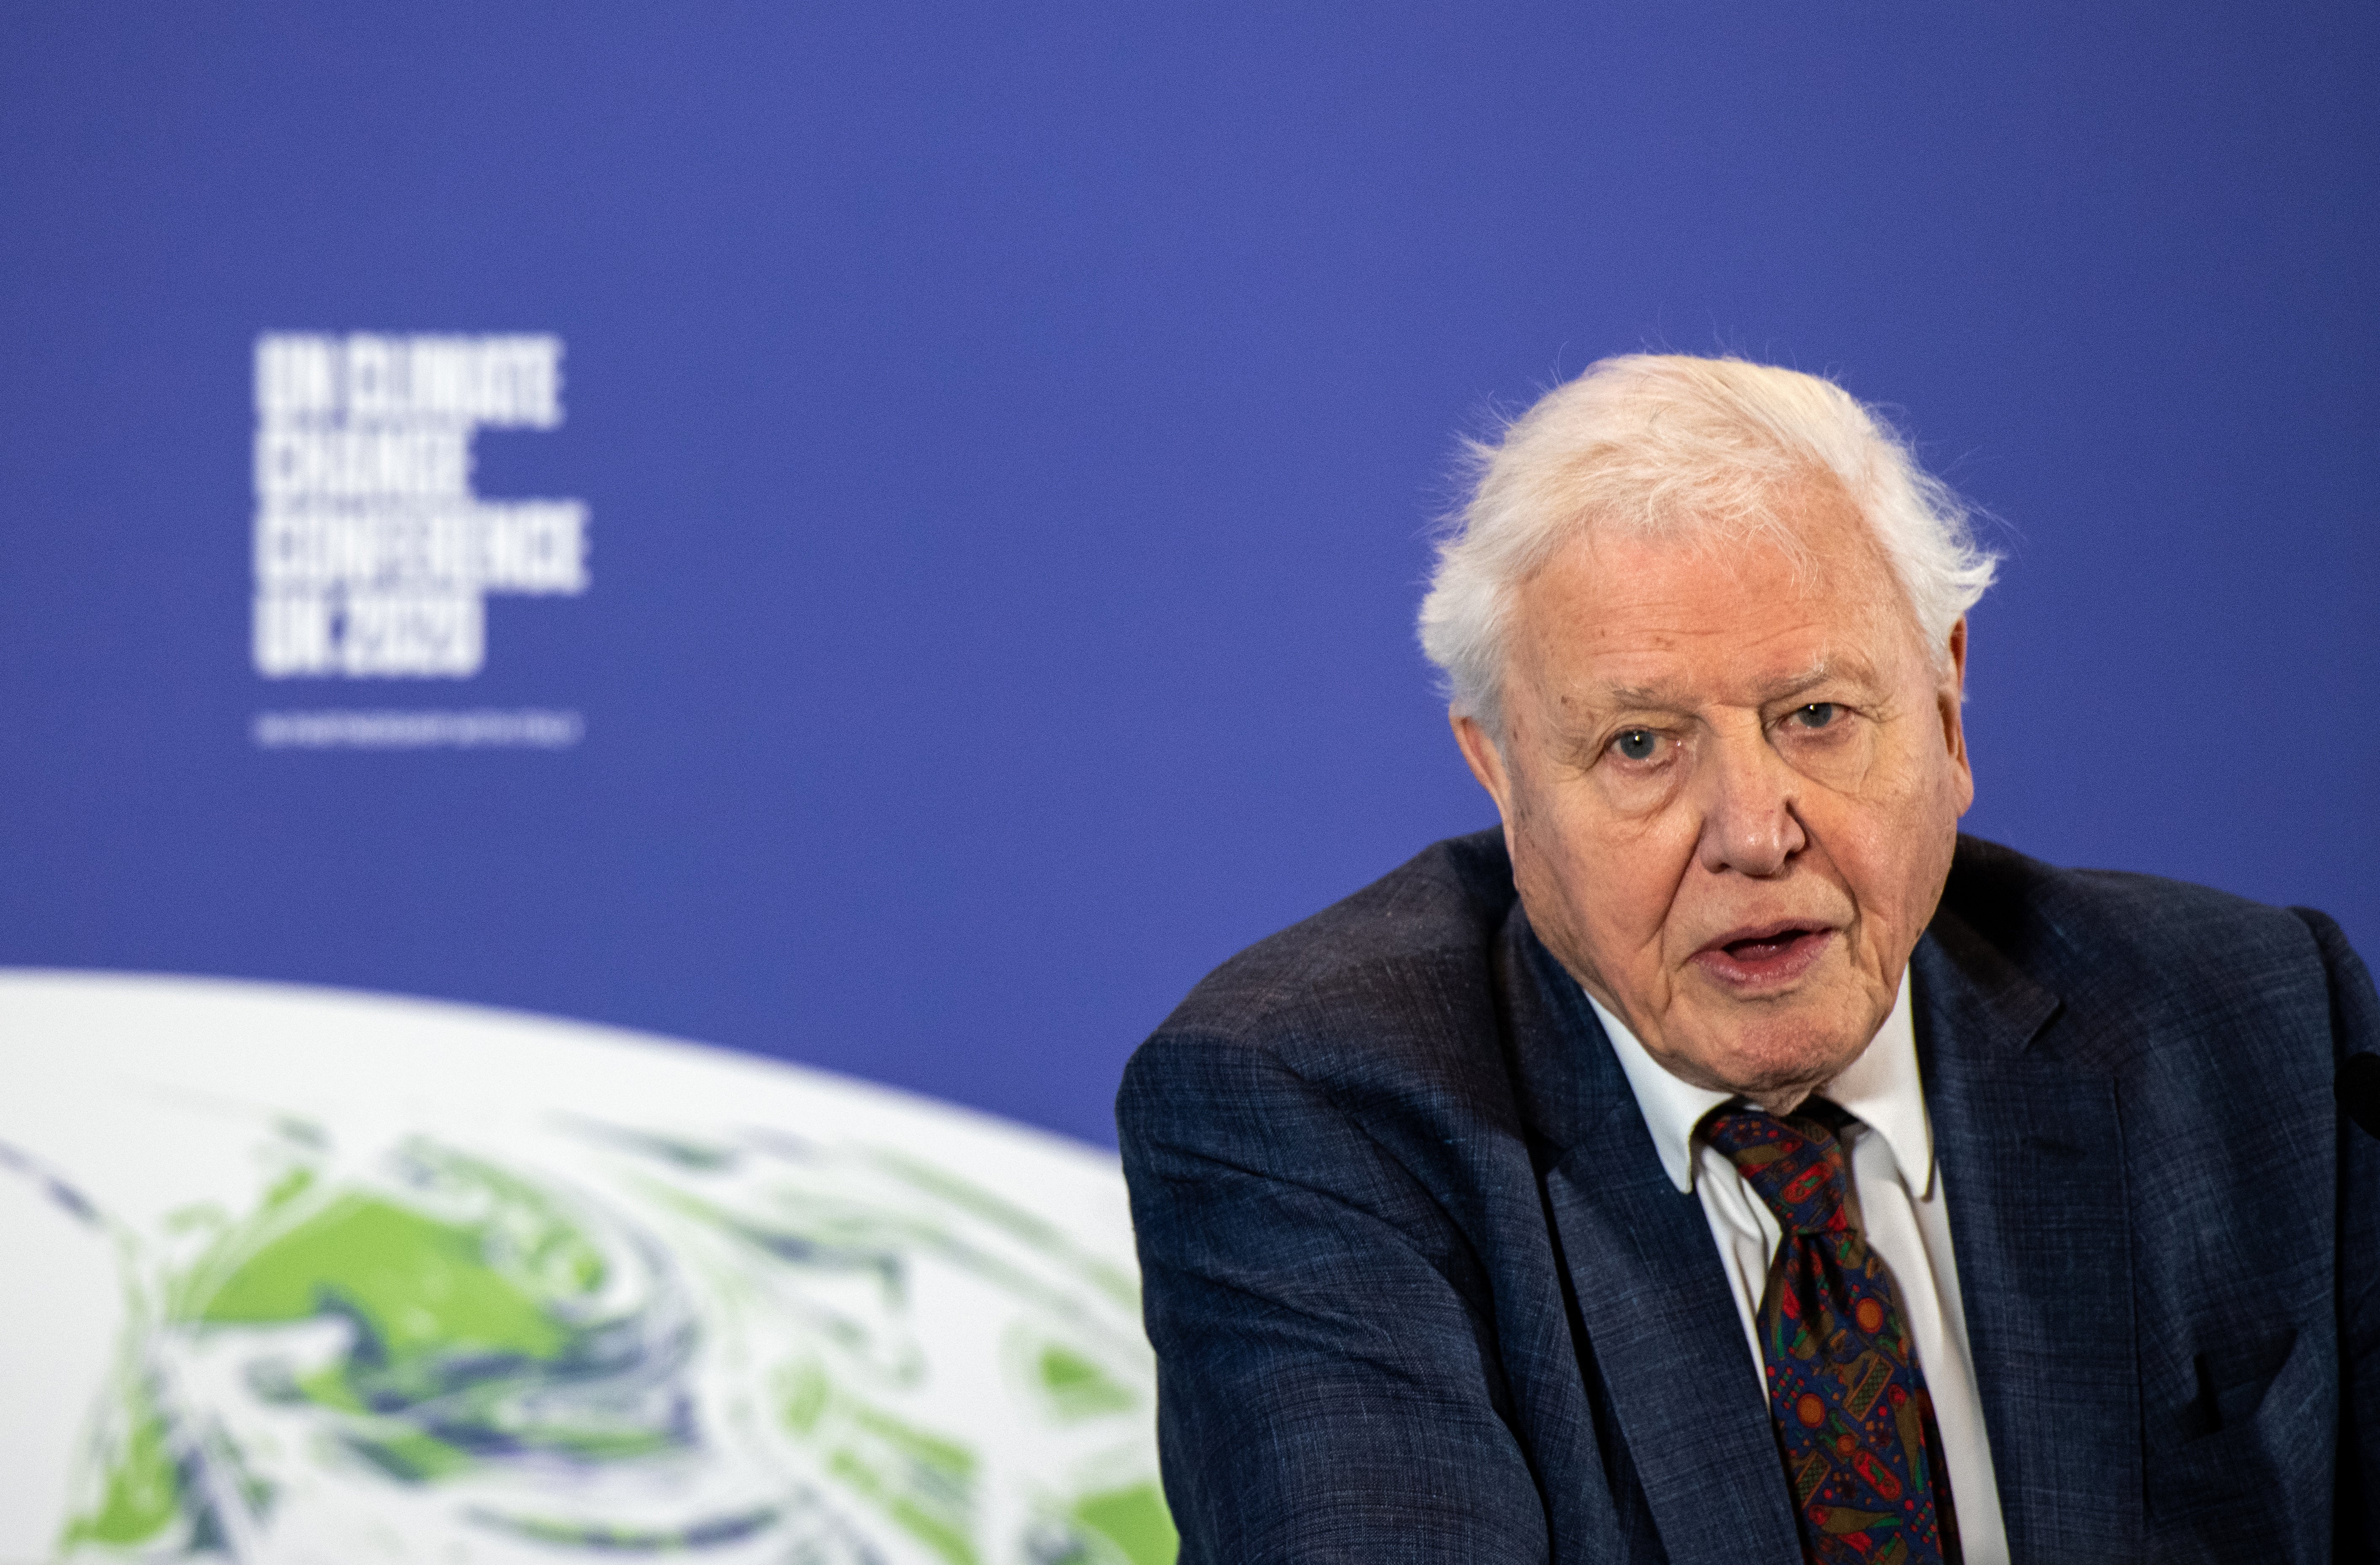 Sir David Attenborough has criticised the government for its att